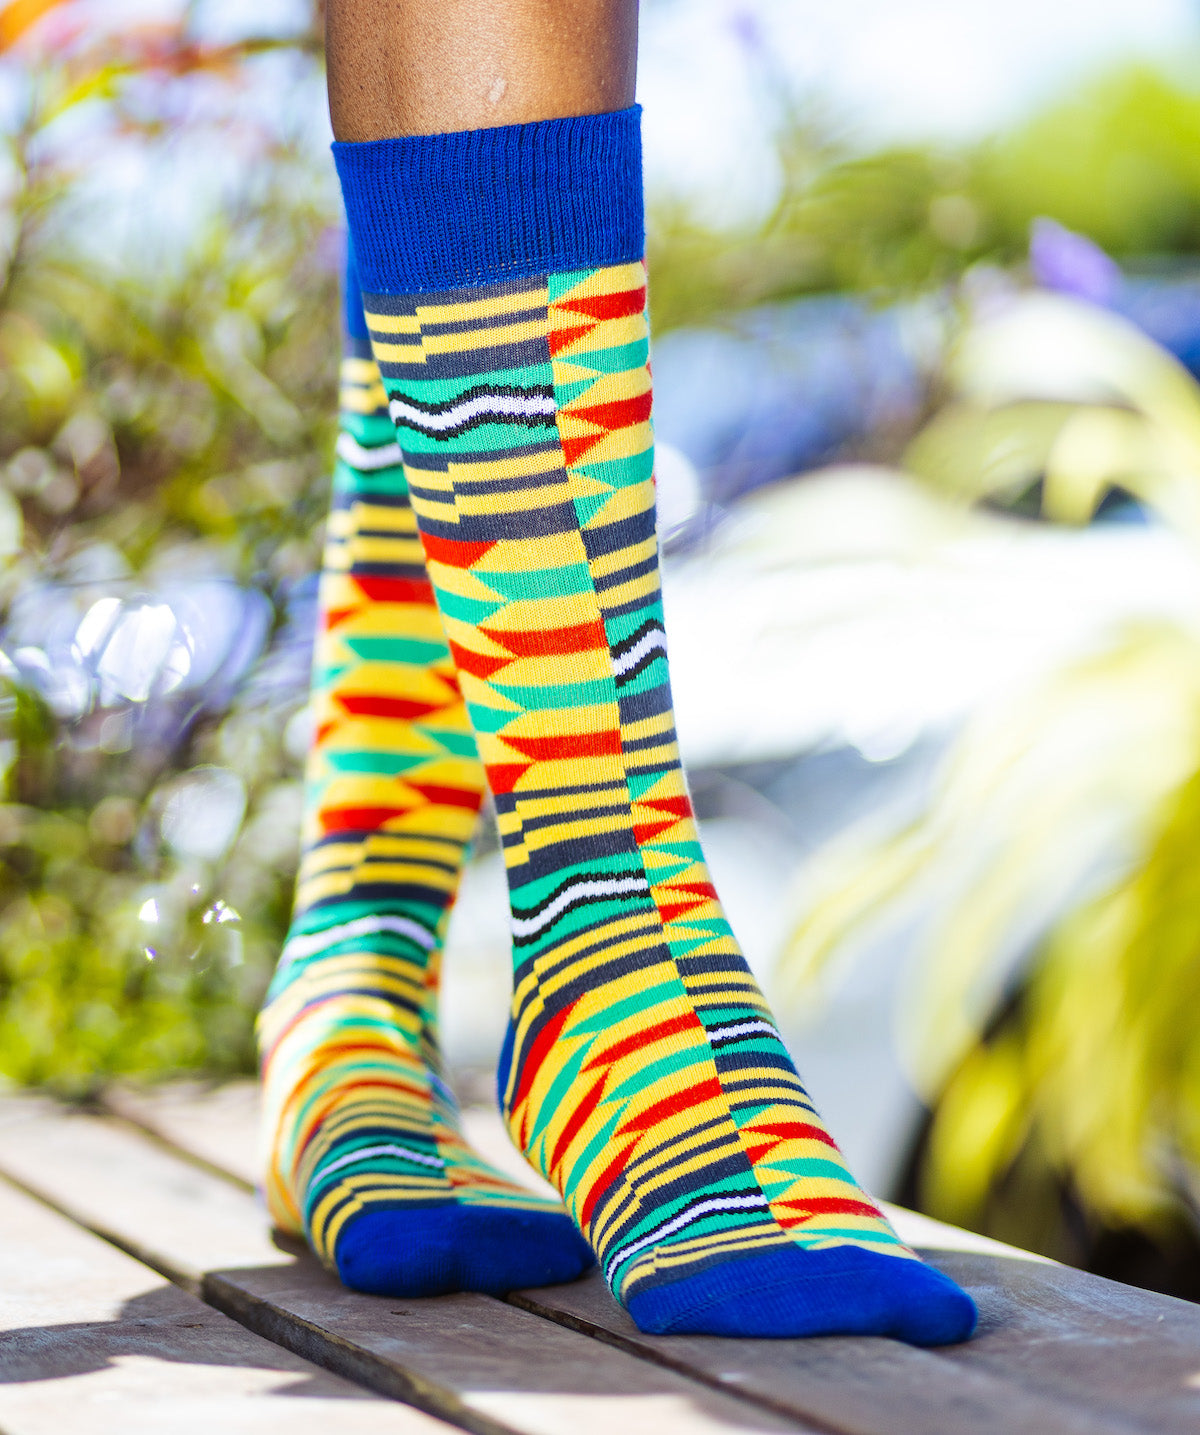 Premium Quality African Kente Cloth Socks for Dress or Casual